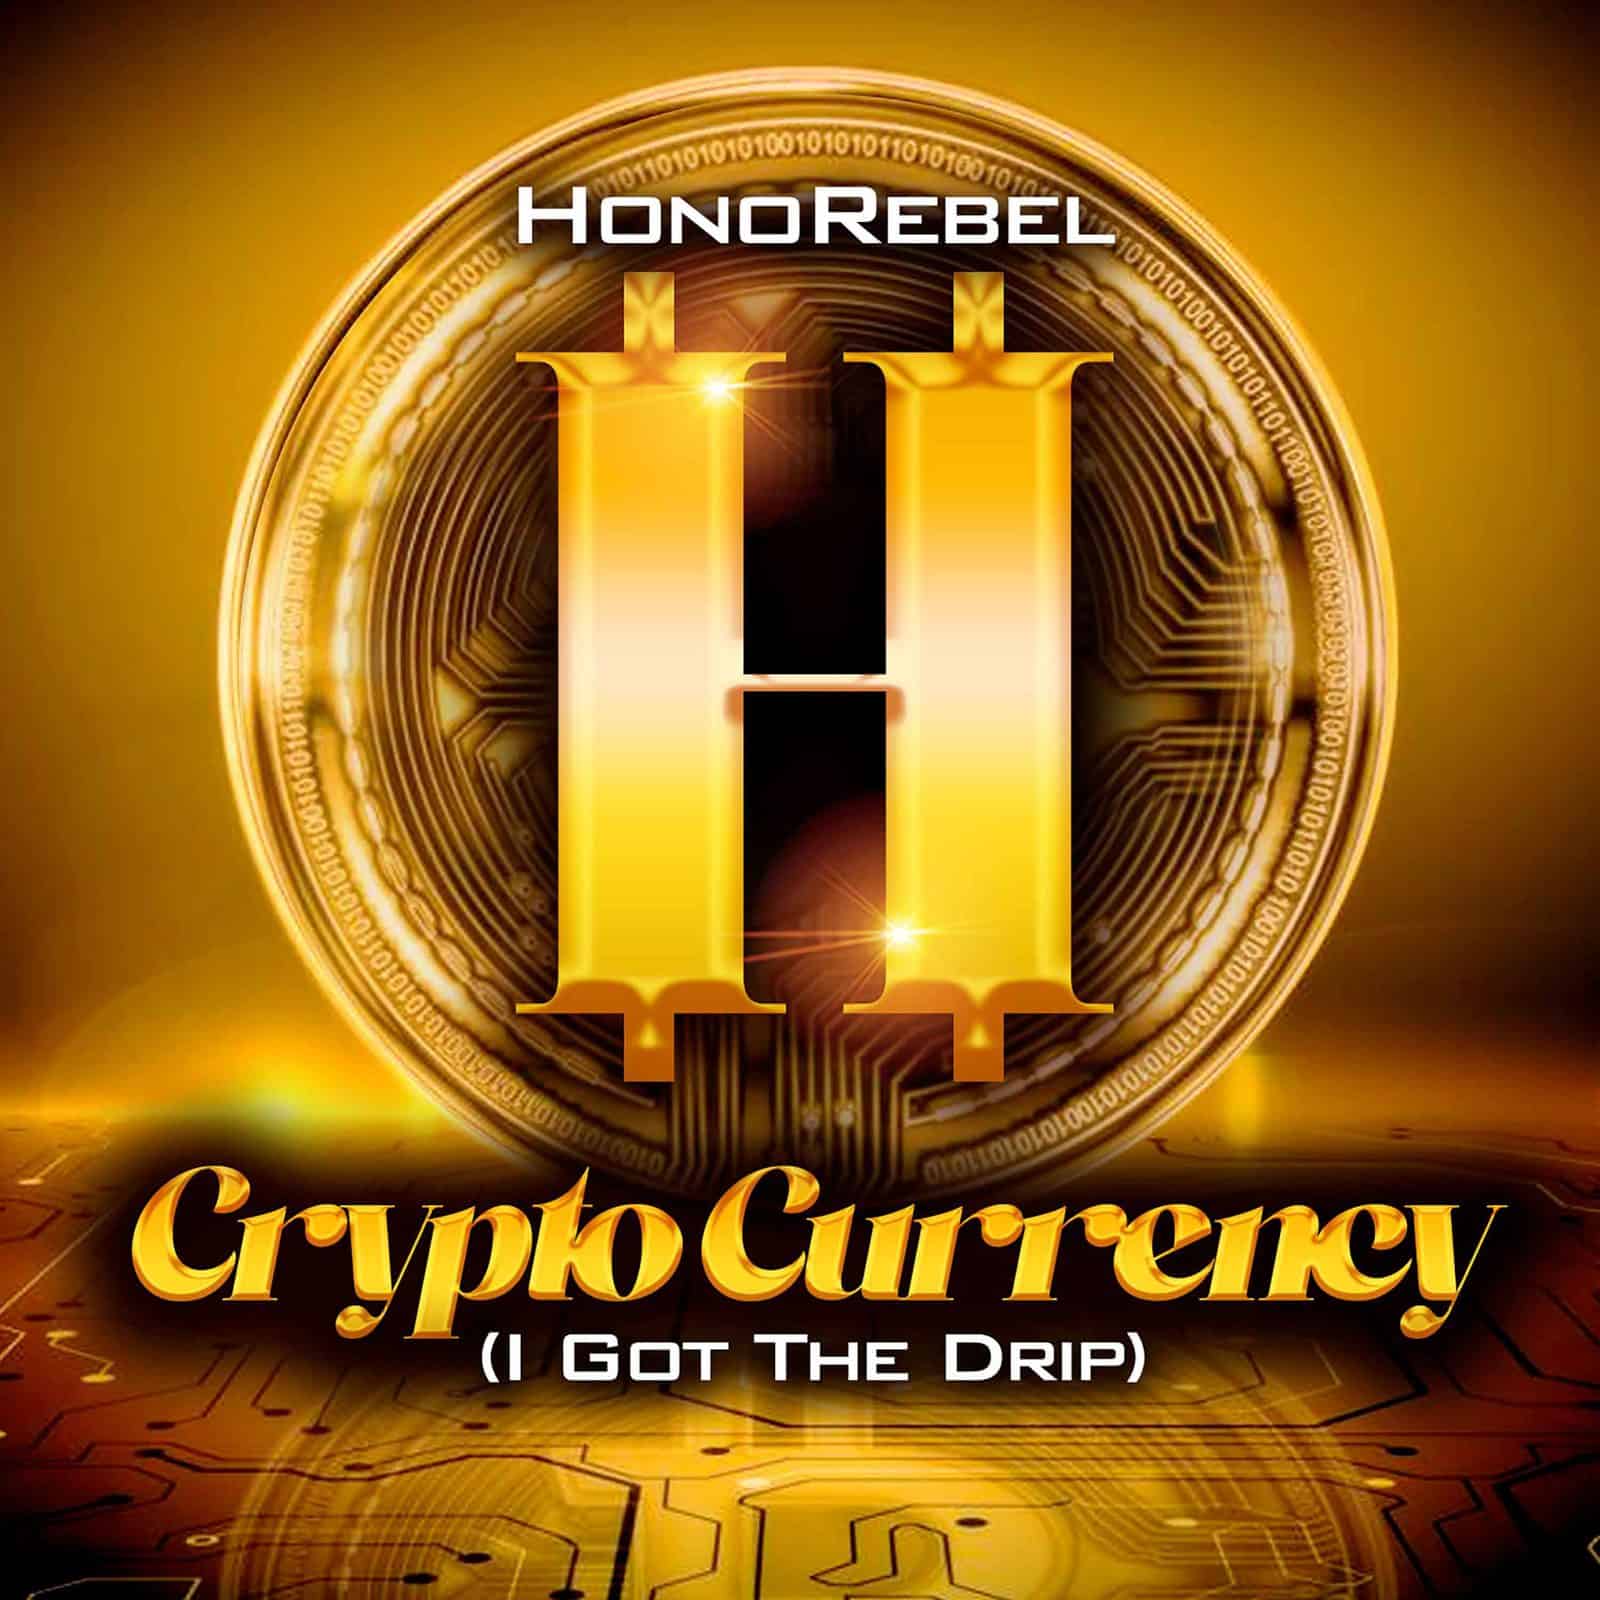 Honorebel - CryptoCurrency (I Got The Drip)